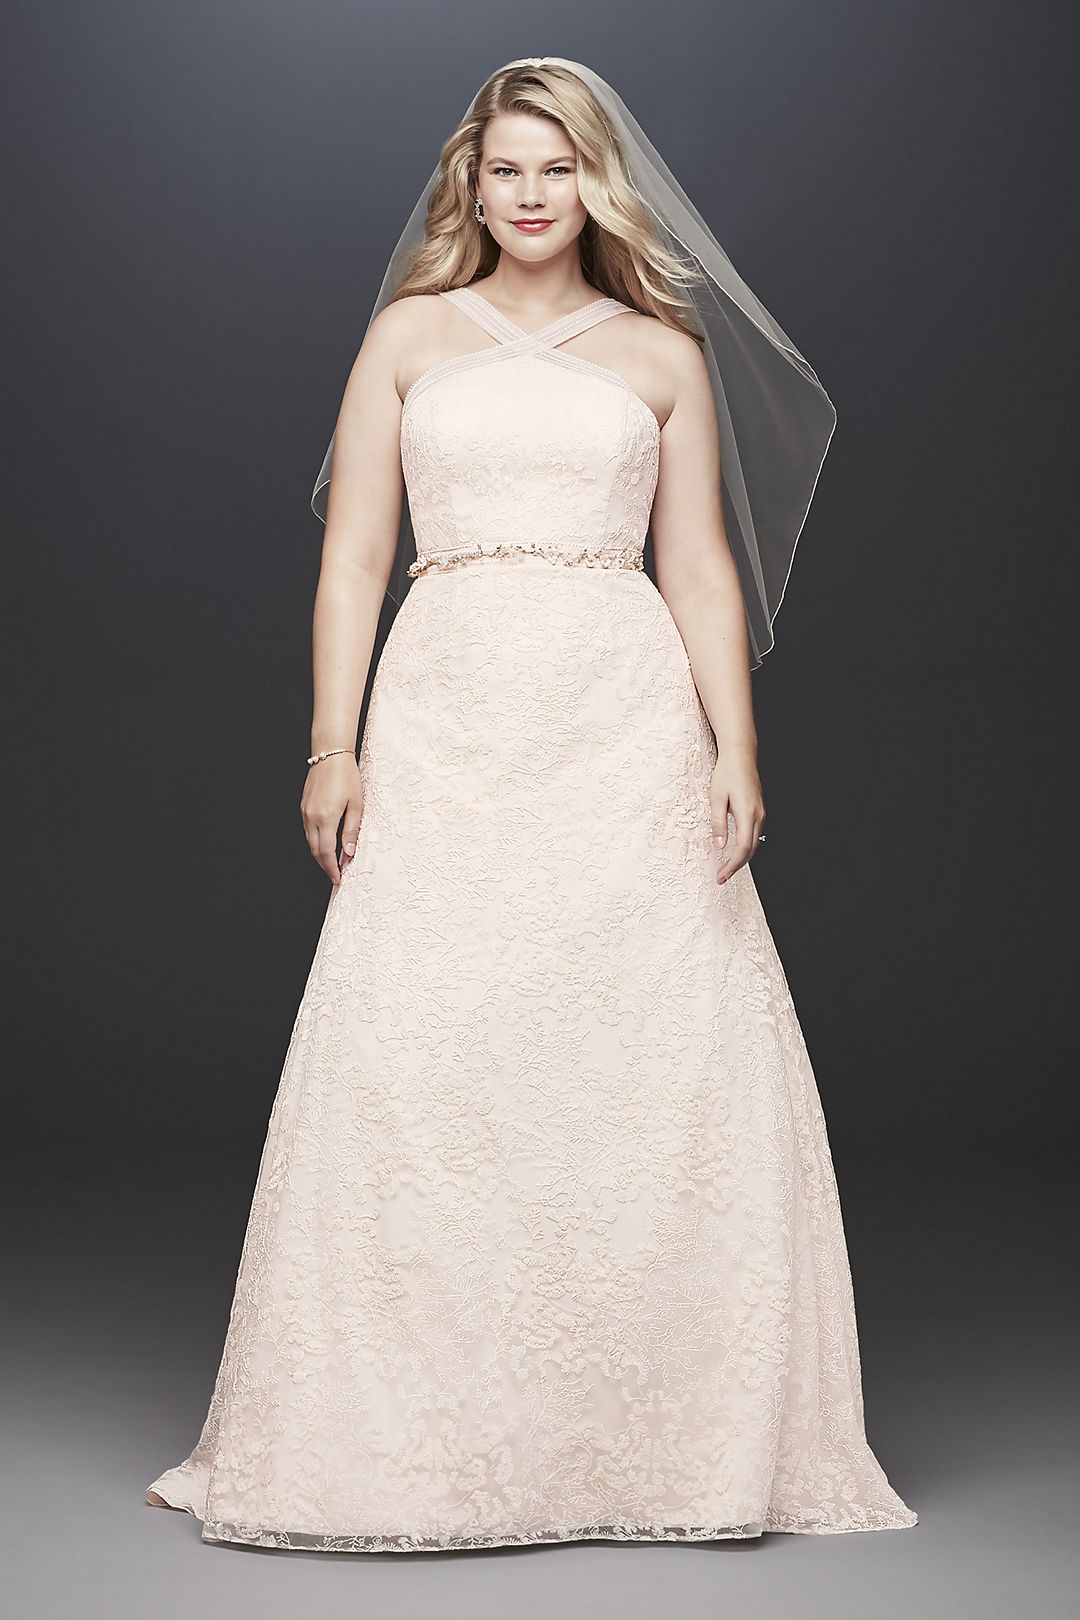 As- Is Embroidered Y-Neck Plus Size Wedding Dress Image 1